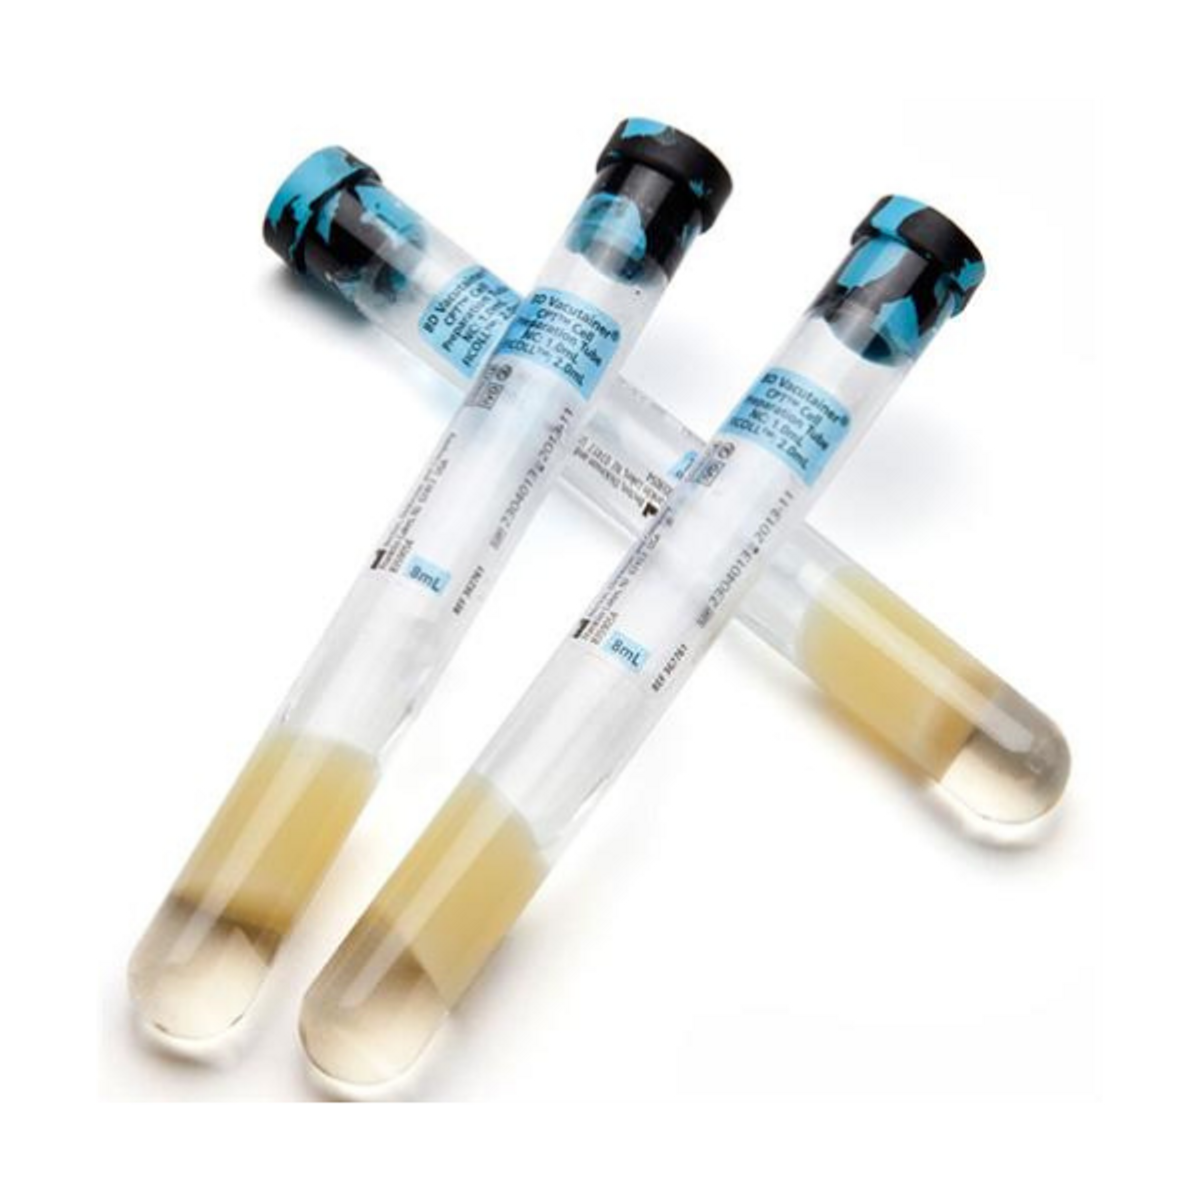 BD Vacutainer Mononuclear Cell Preparation Tube (cpt)